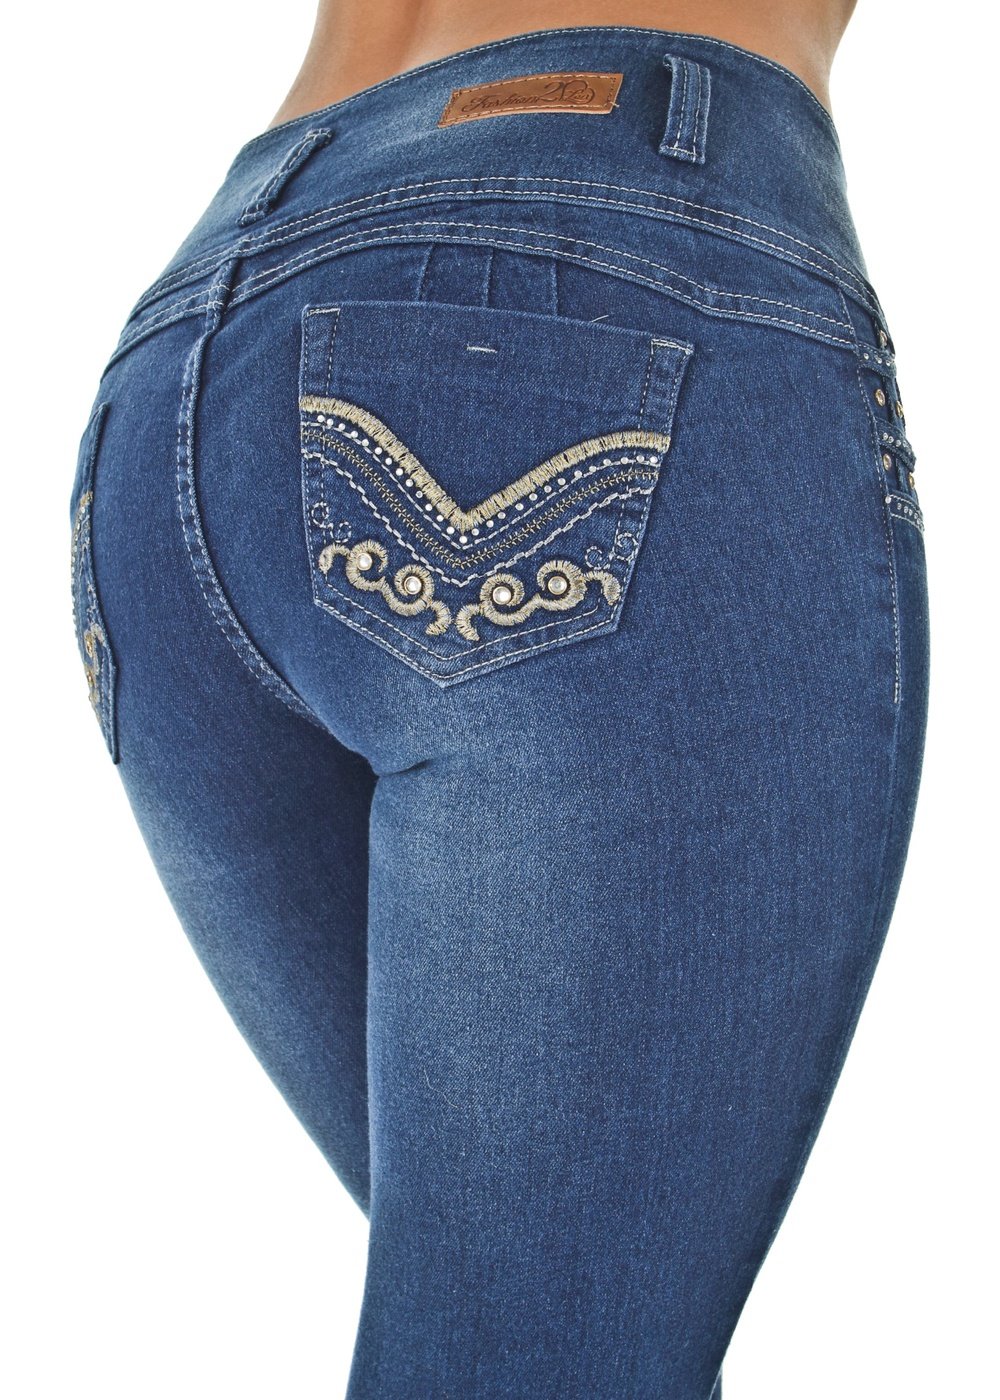 Wishe High Waisted Butt Lifting Jeans Colombian Design Jeans